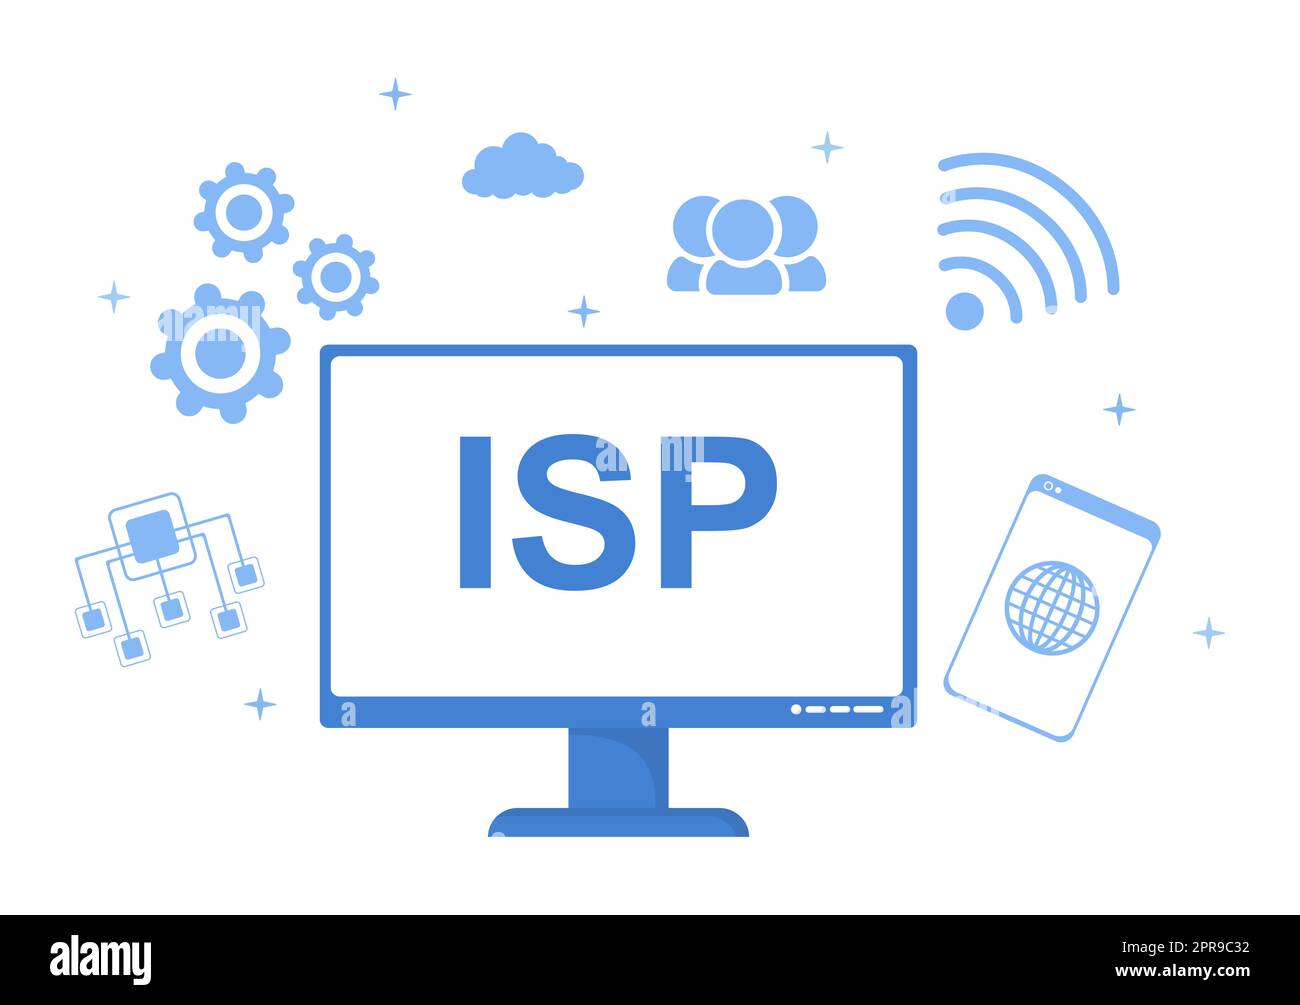 ISP or Internet Service Provider Cartoon Illustration with Keywords and Icons for Intranet Access, Secure Network Connection and Privacy Protection Stock Photo